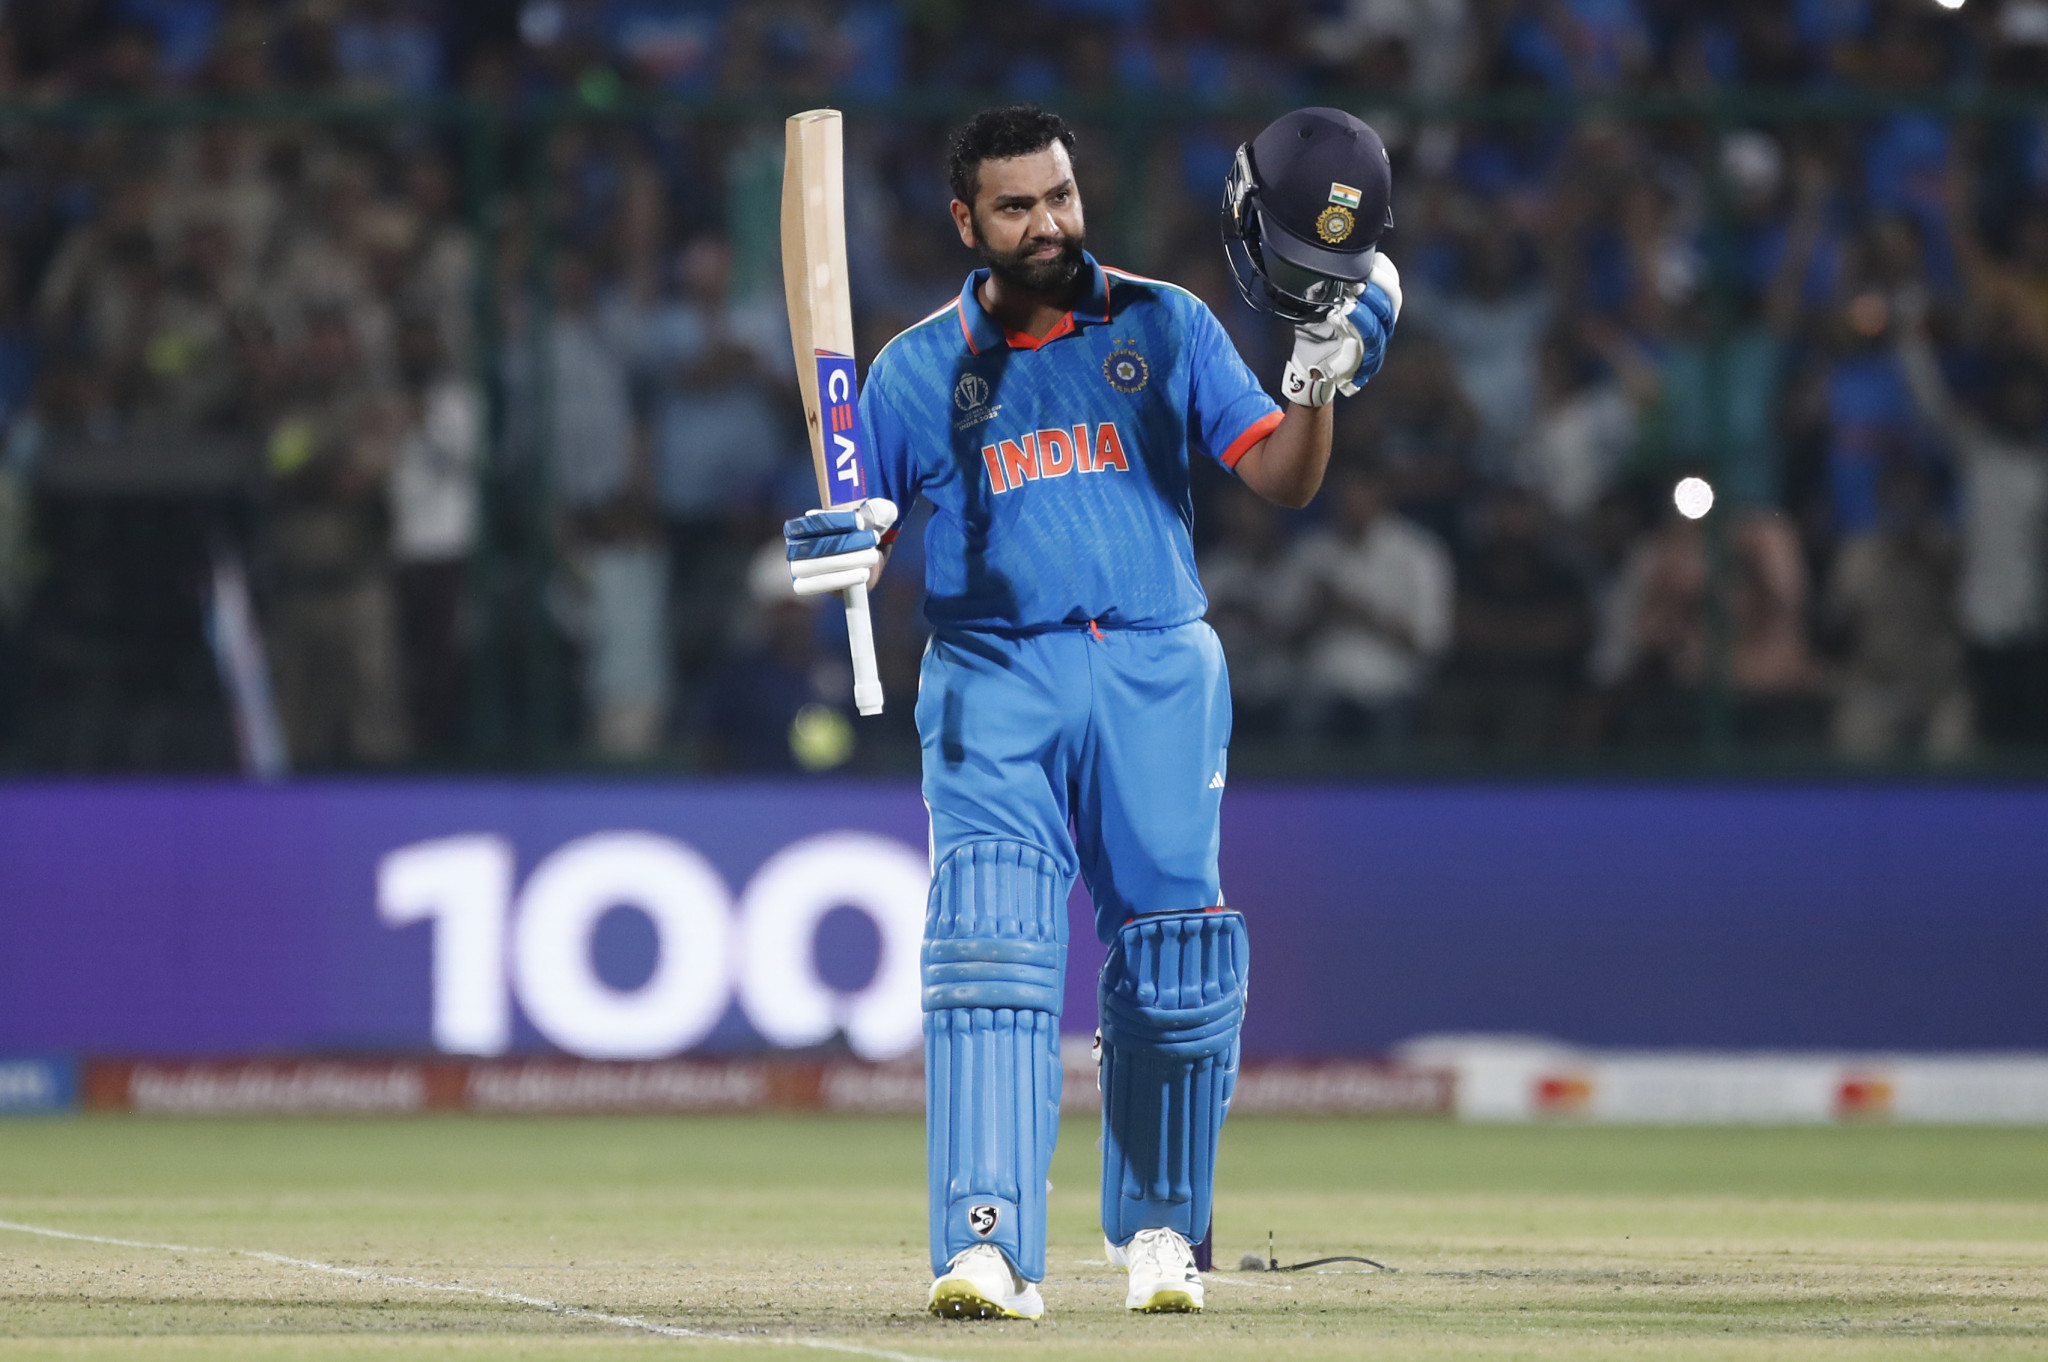 India captain Rohit Sharma hit 131 to lead from the front as the nation claimed a second win of the Cricket World Cup by defeating Afghanistan ©Getty Images